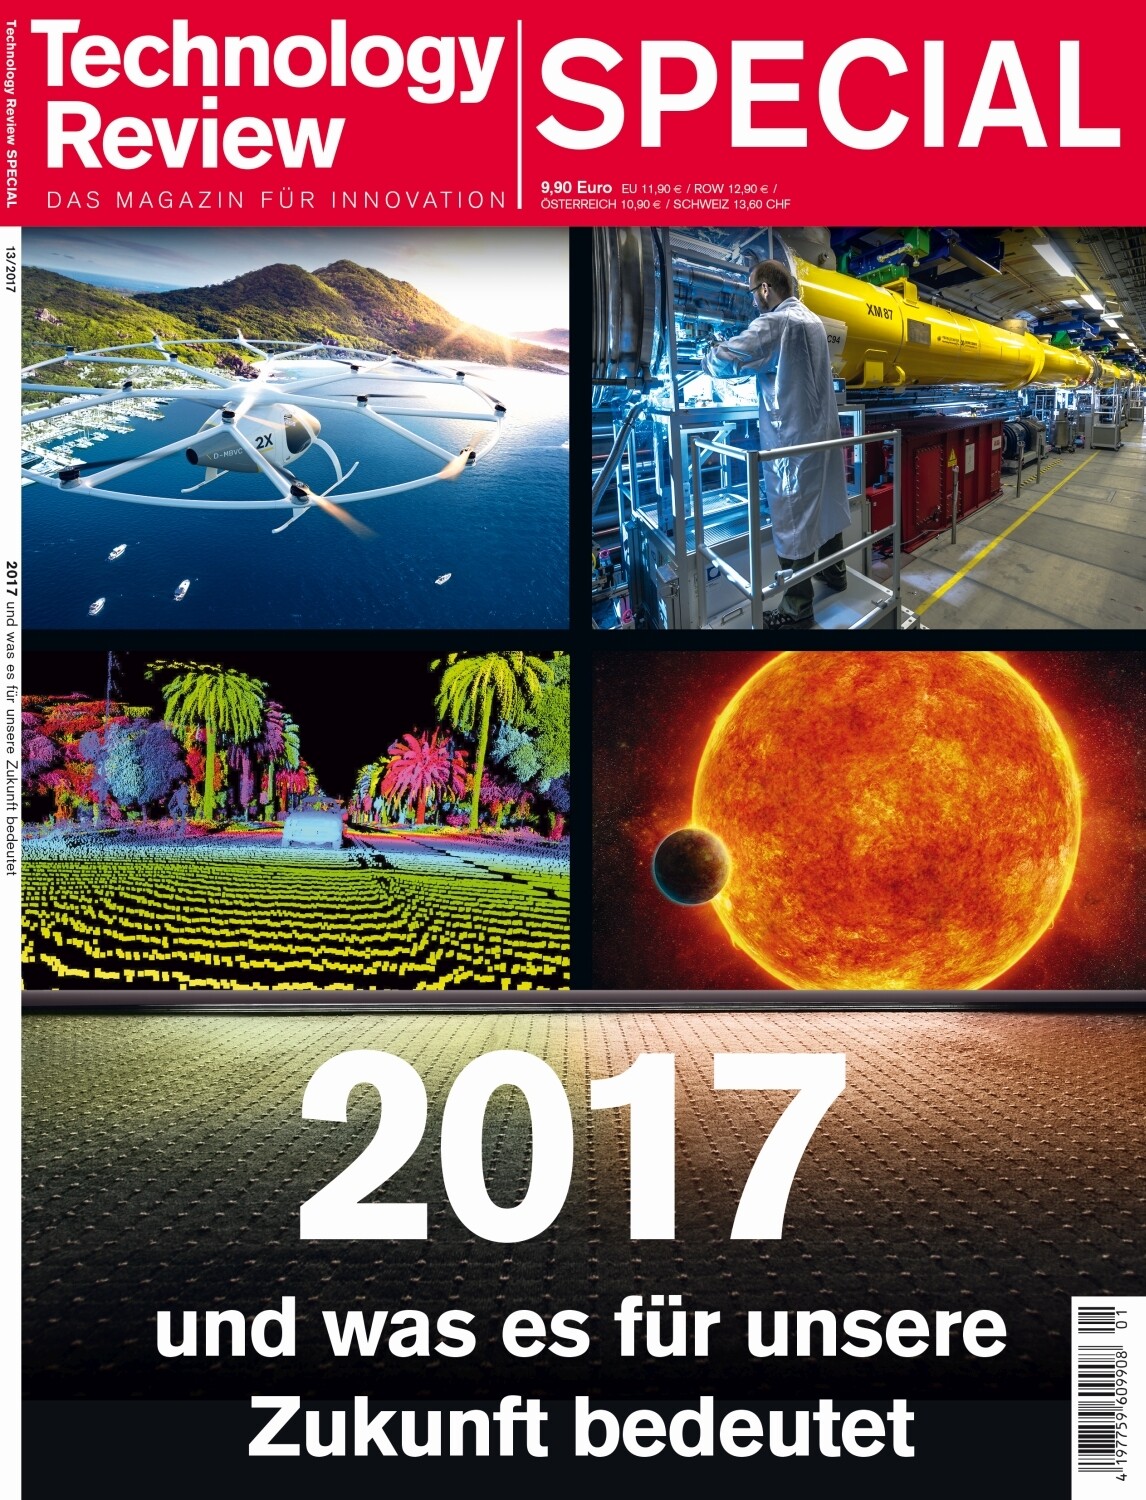 Technology Review 13/2017 SPECIAL